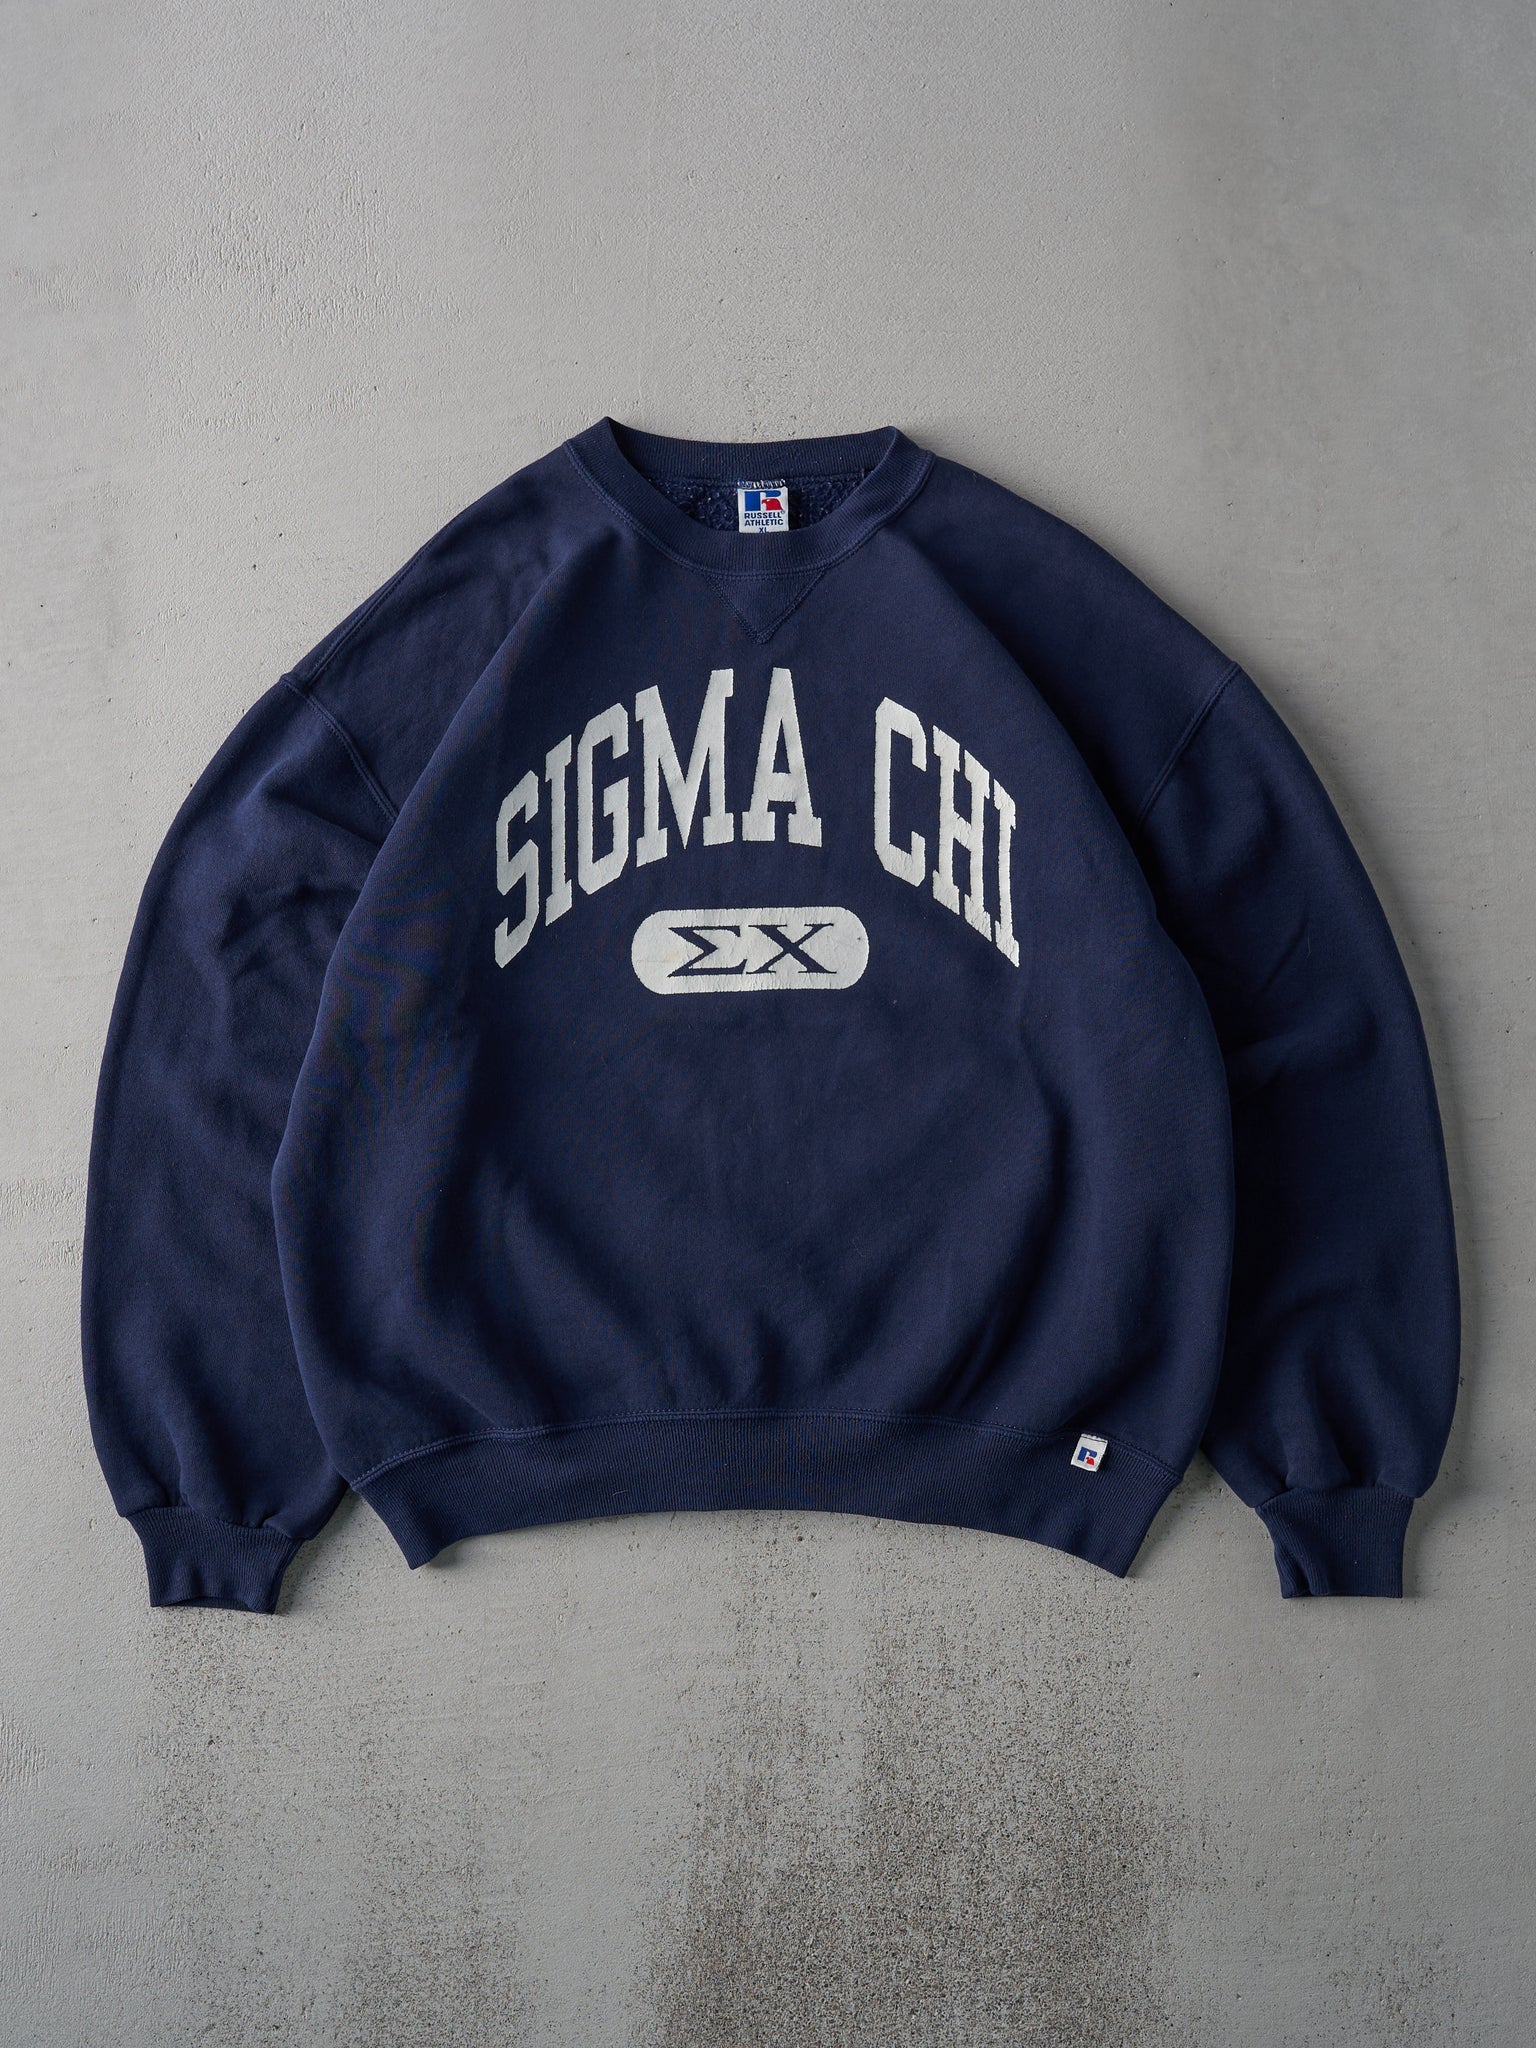 Vintage 90s Navy Sigma Chi Fraternity Russell Athletics Crewneck (L ...